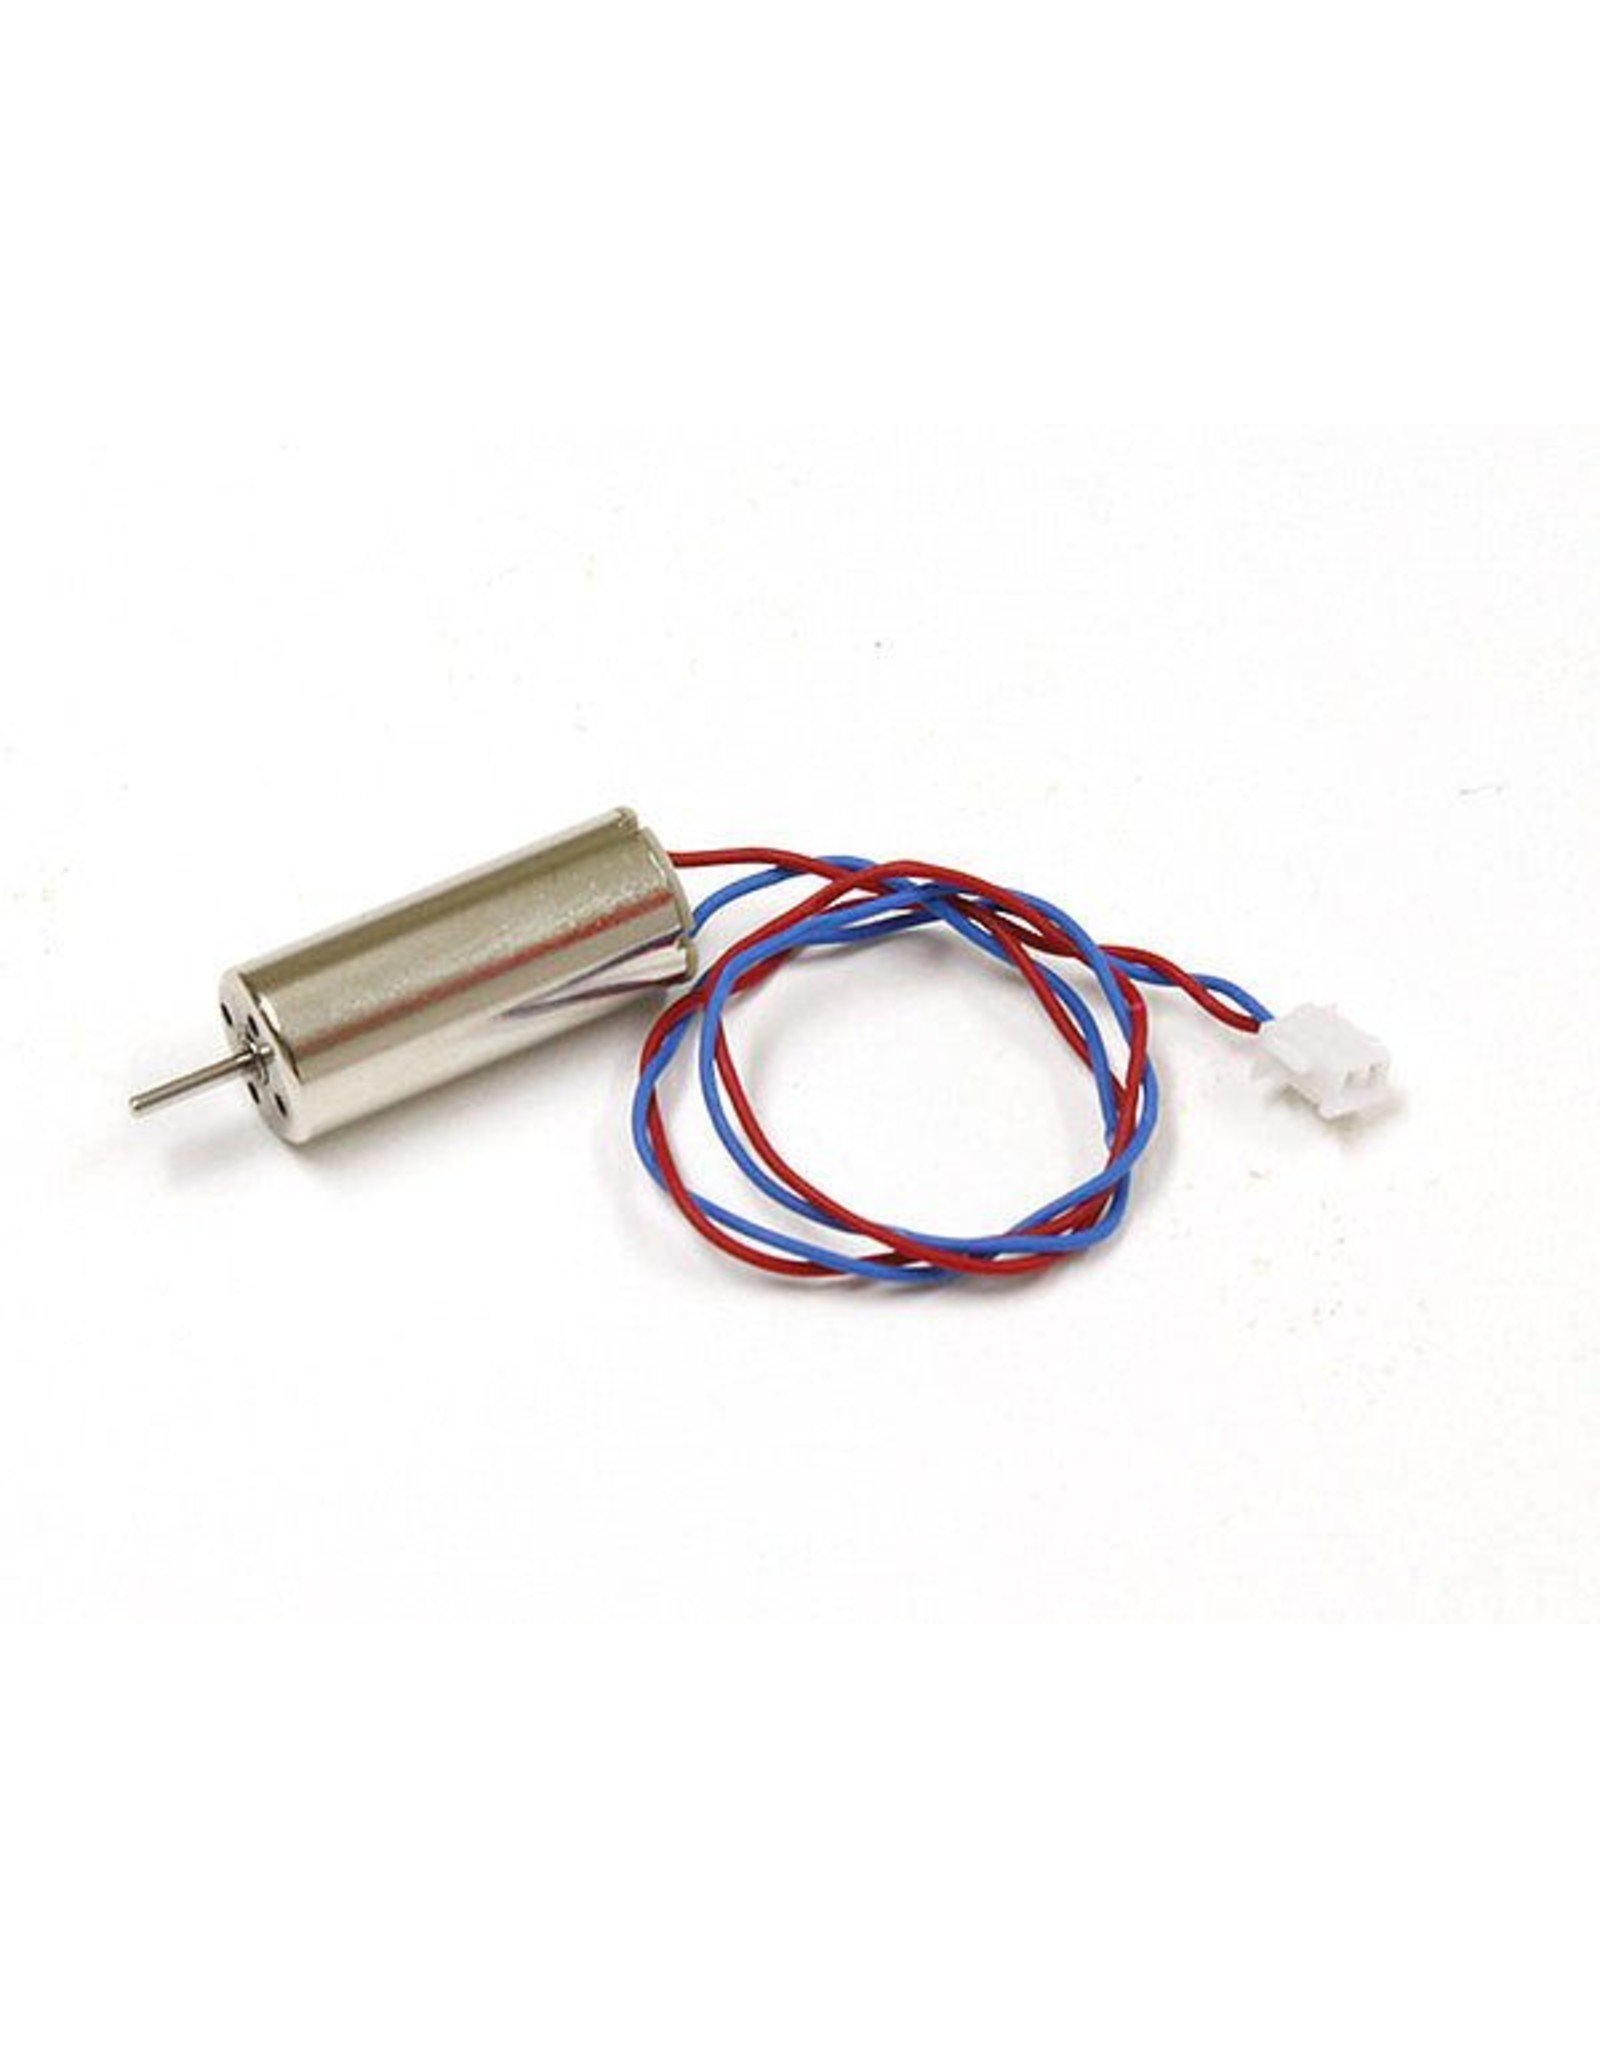 Kyosho 8.5mm Motor (1pc/Normal Rotation)  (DR011-R)